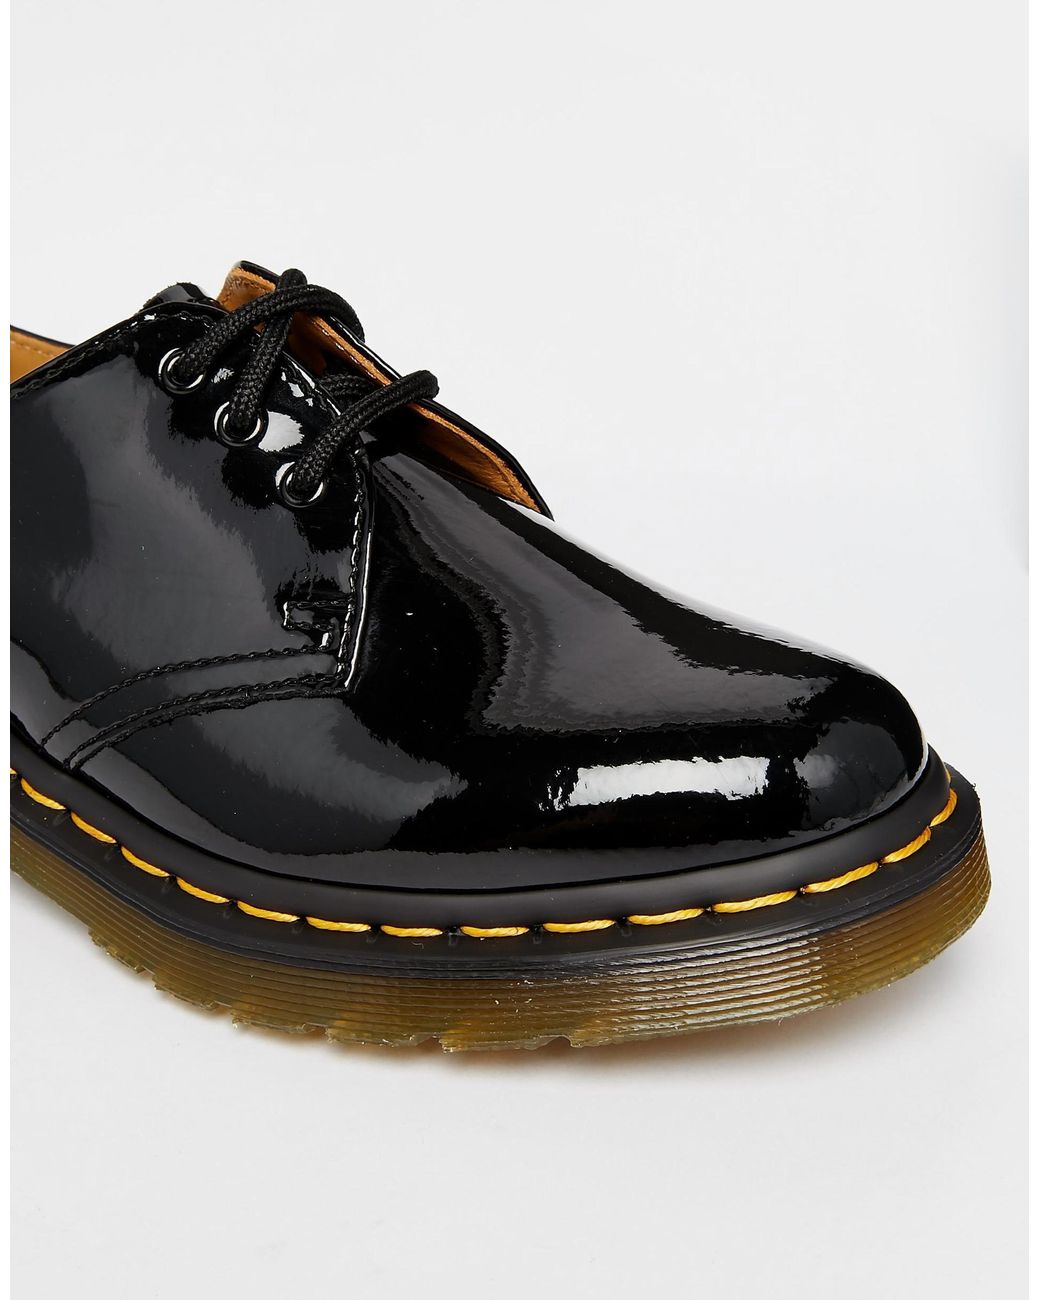 Dr. Martens Leather 1461 Classic Flat Shoes in Black - Save 11% - Lyst